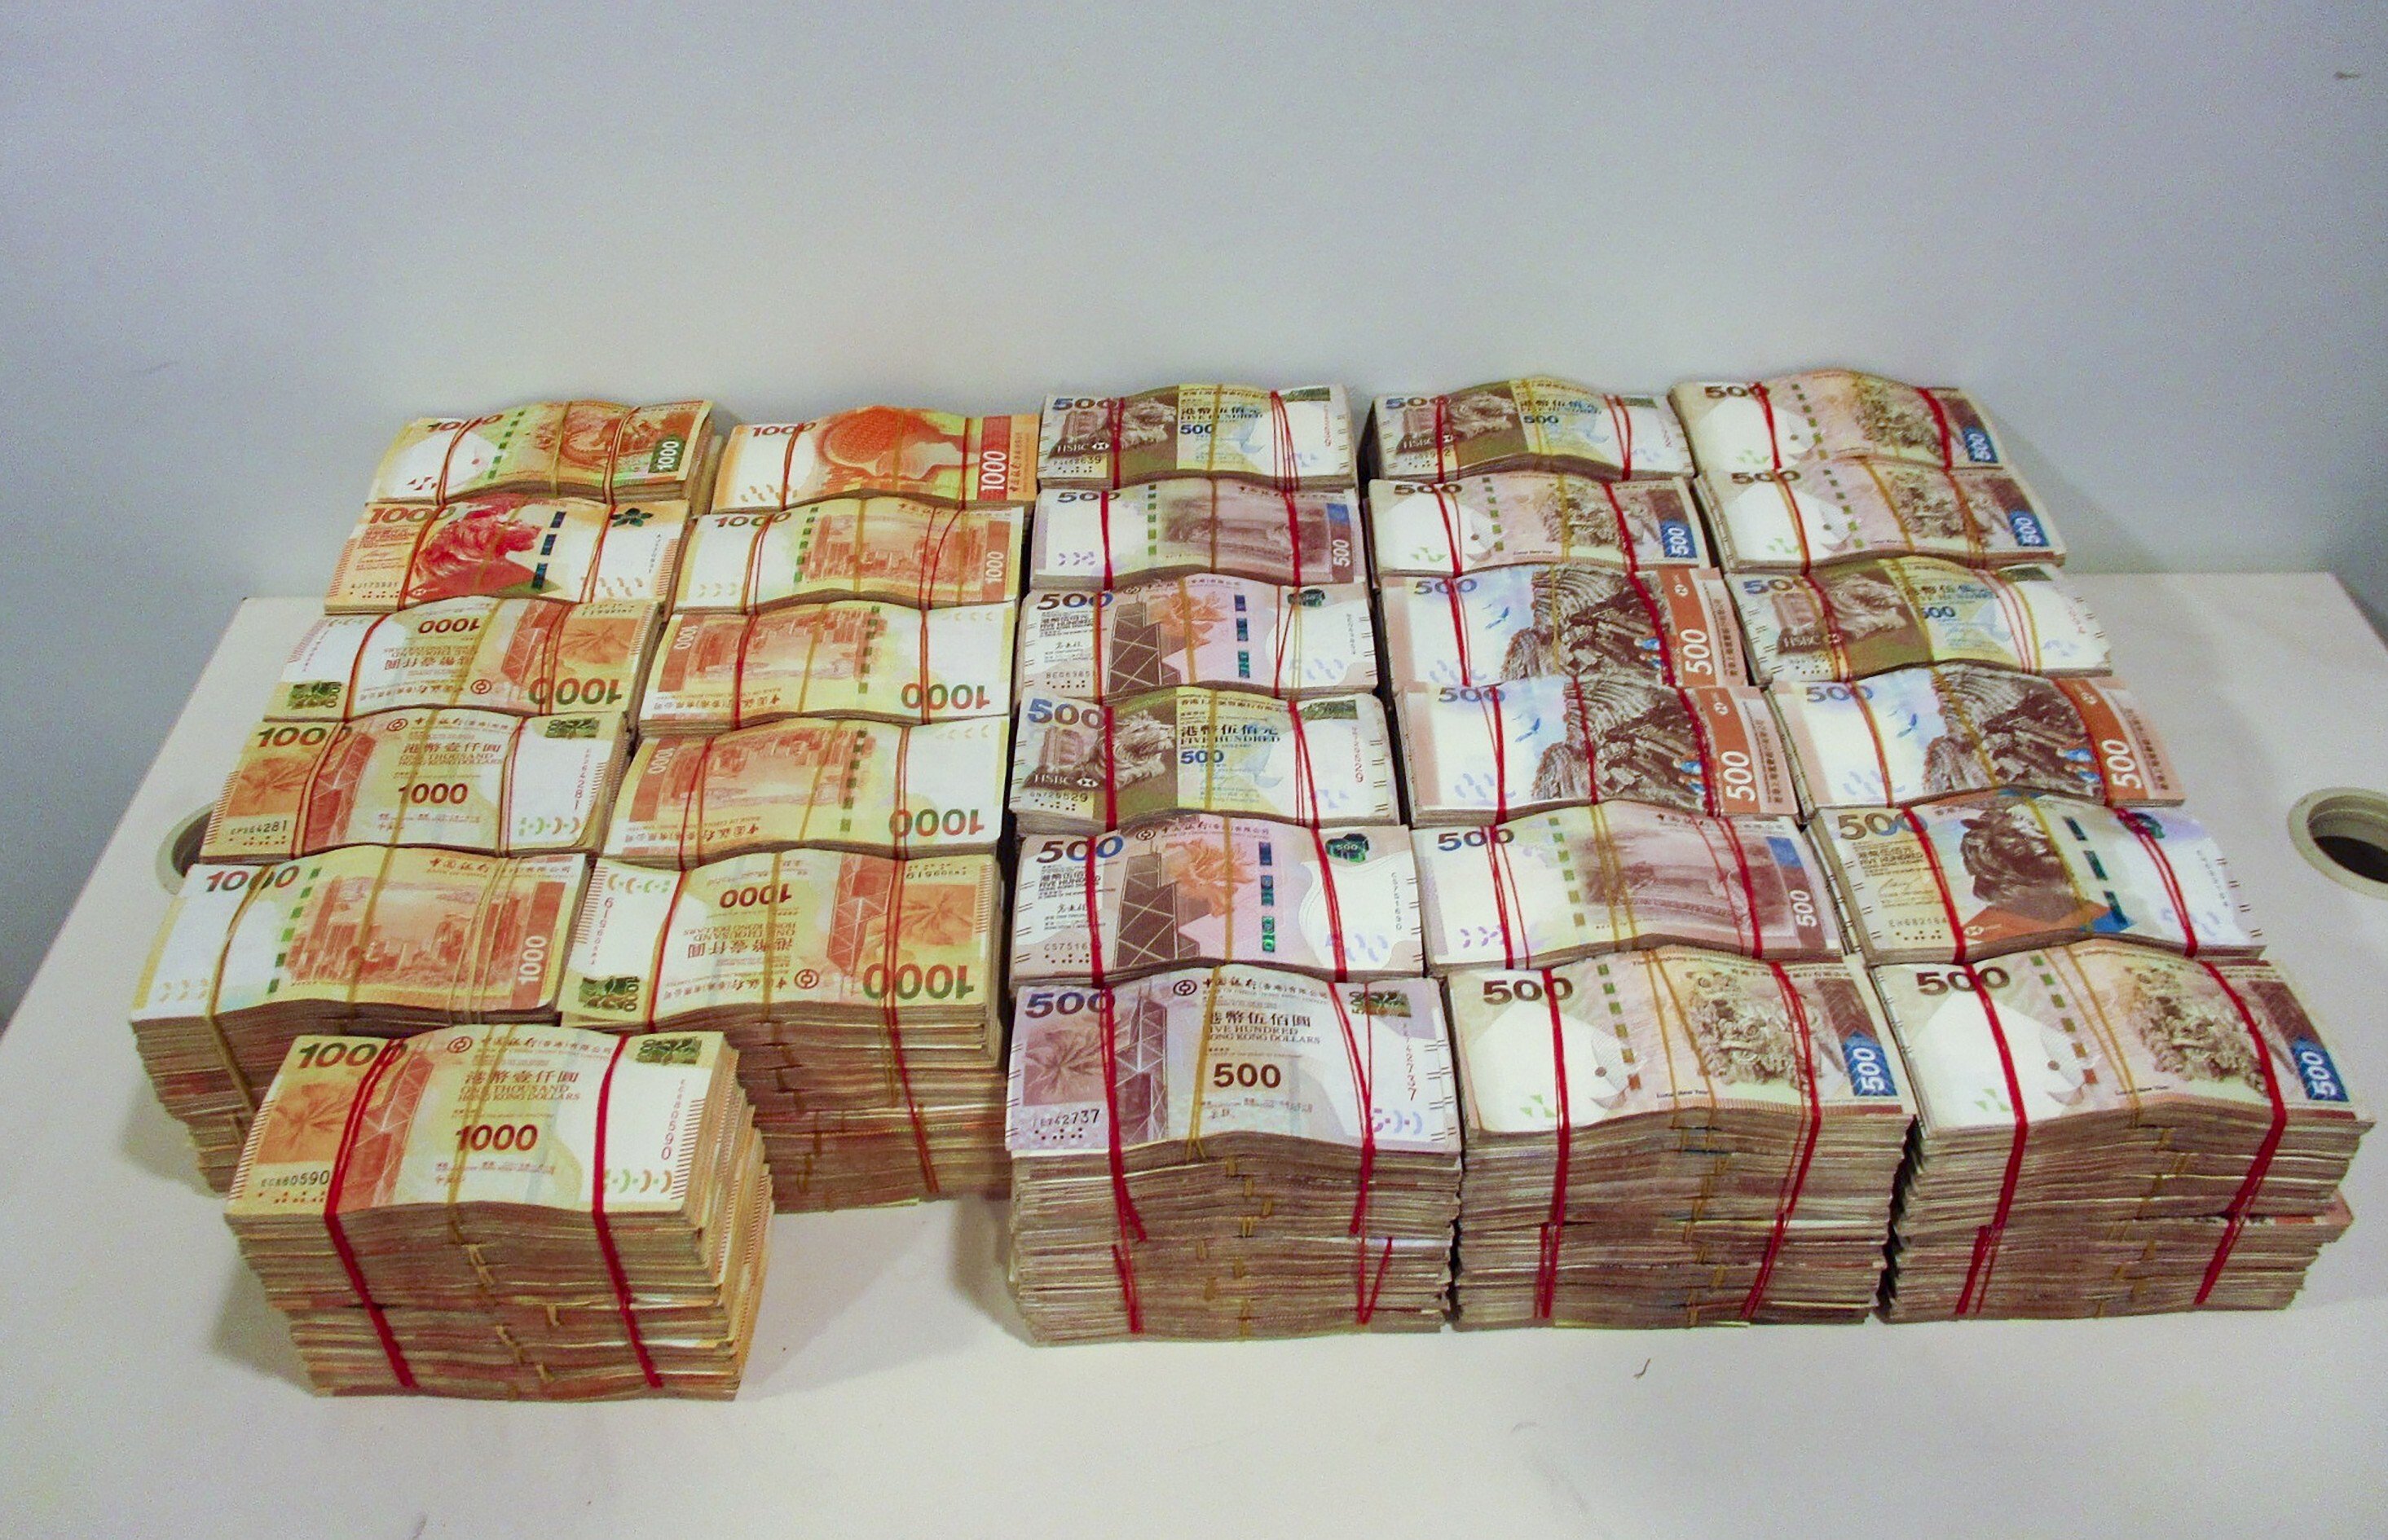 Cash seized in an operation that broke up a money-laundering ring engaged in smuggling criminal proceeds across the Hong Kong-Zhuhai-Macau Bridge. Photo: Handout